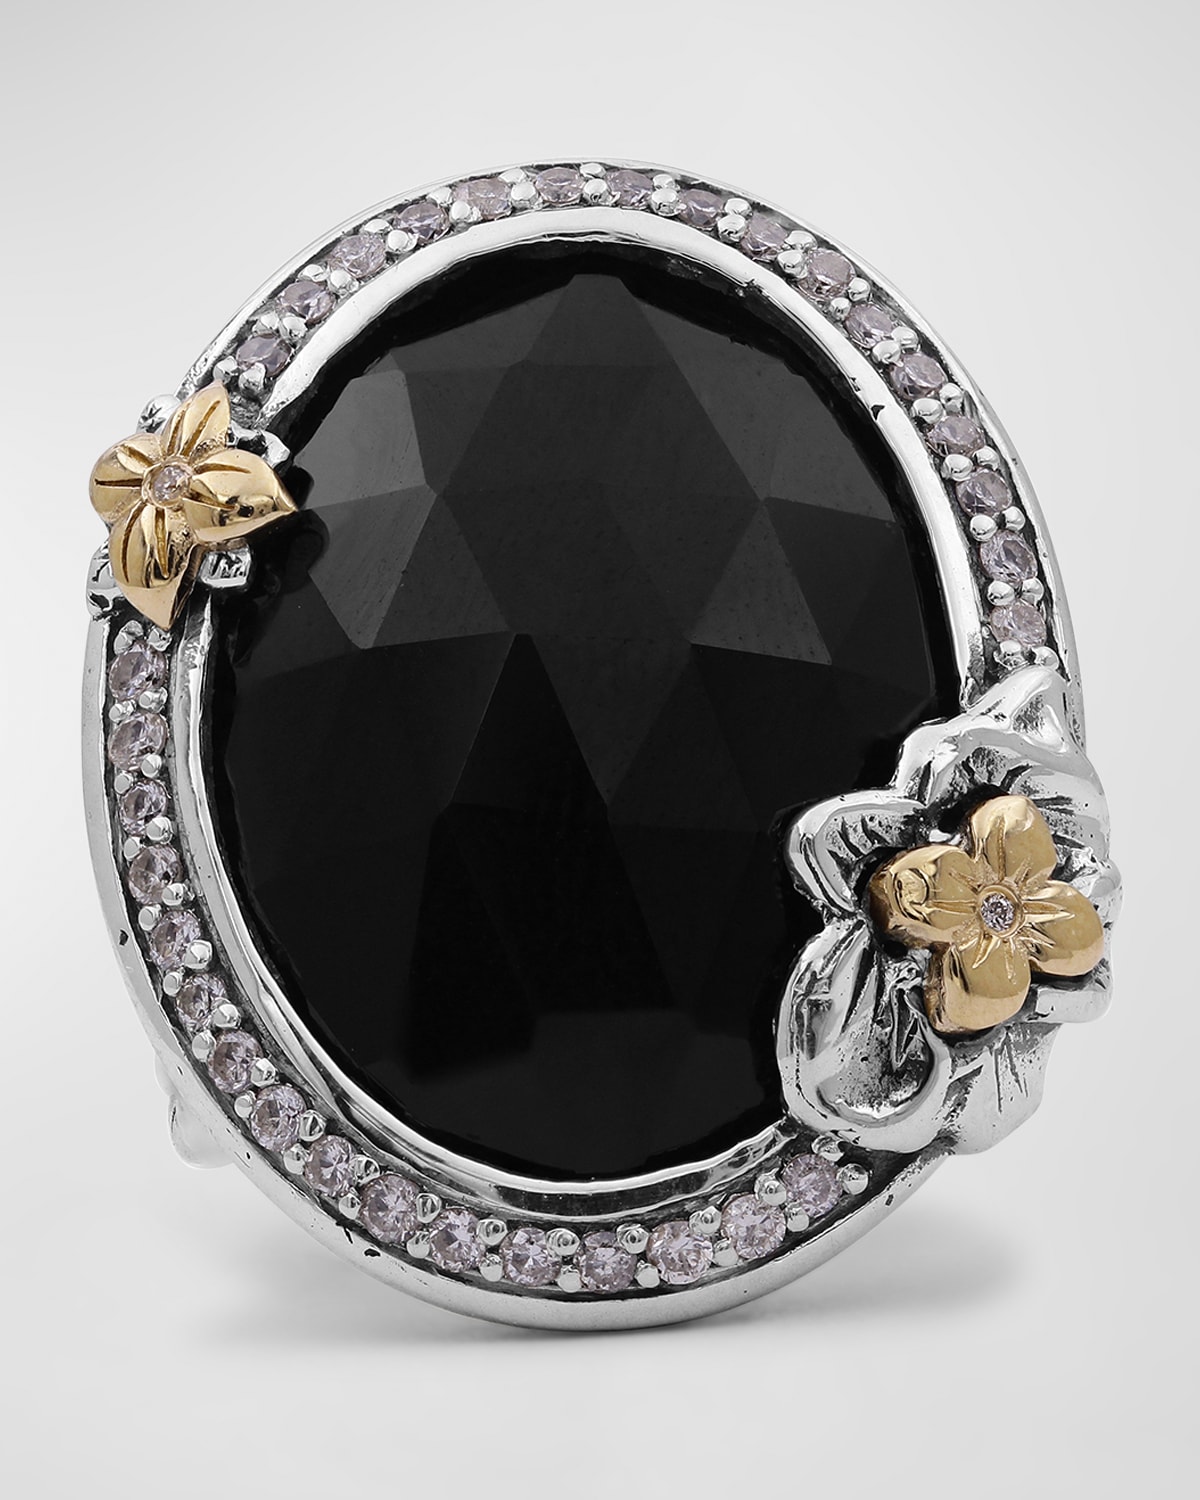 Garden of Stephen Faceted Black Onyx Ring in Sterling Silver with 18K Gold Flowers and Diamonds